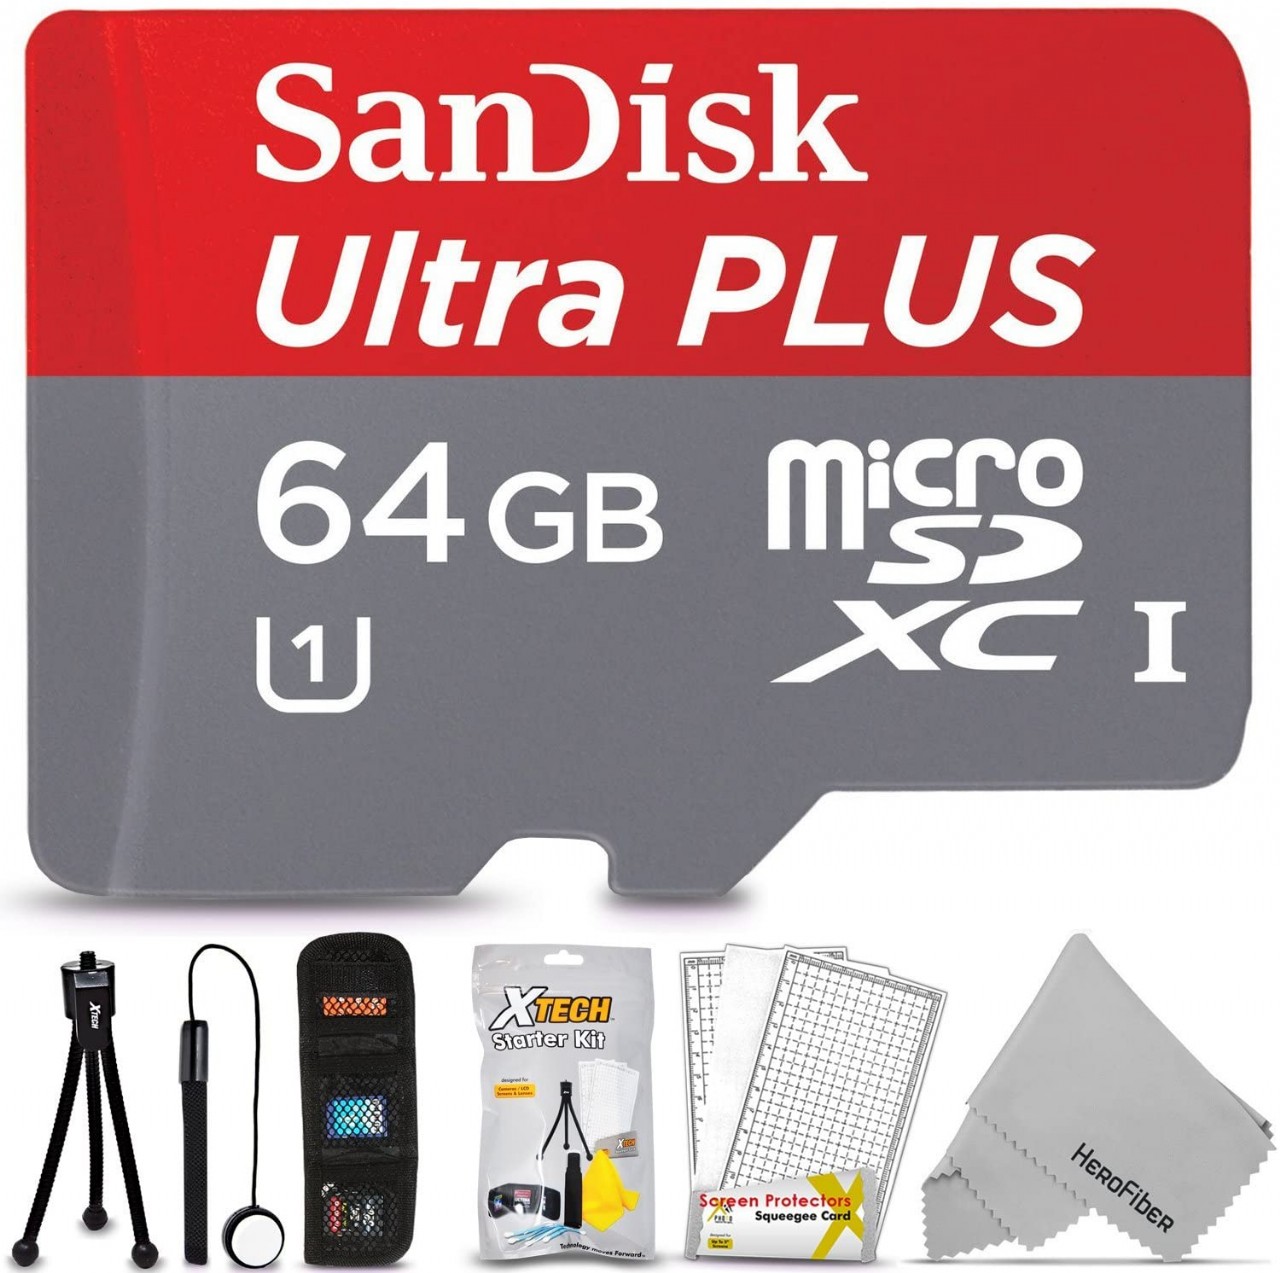 SanDisk 64GB Micro SD Memory Card for Huawei Honor 4C 4A 5X 5C 5A 6X 6C 7i 7X V8 8 9i Pro V9 V10